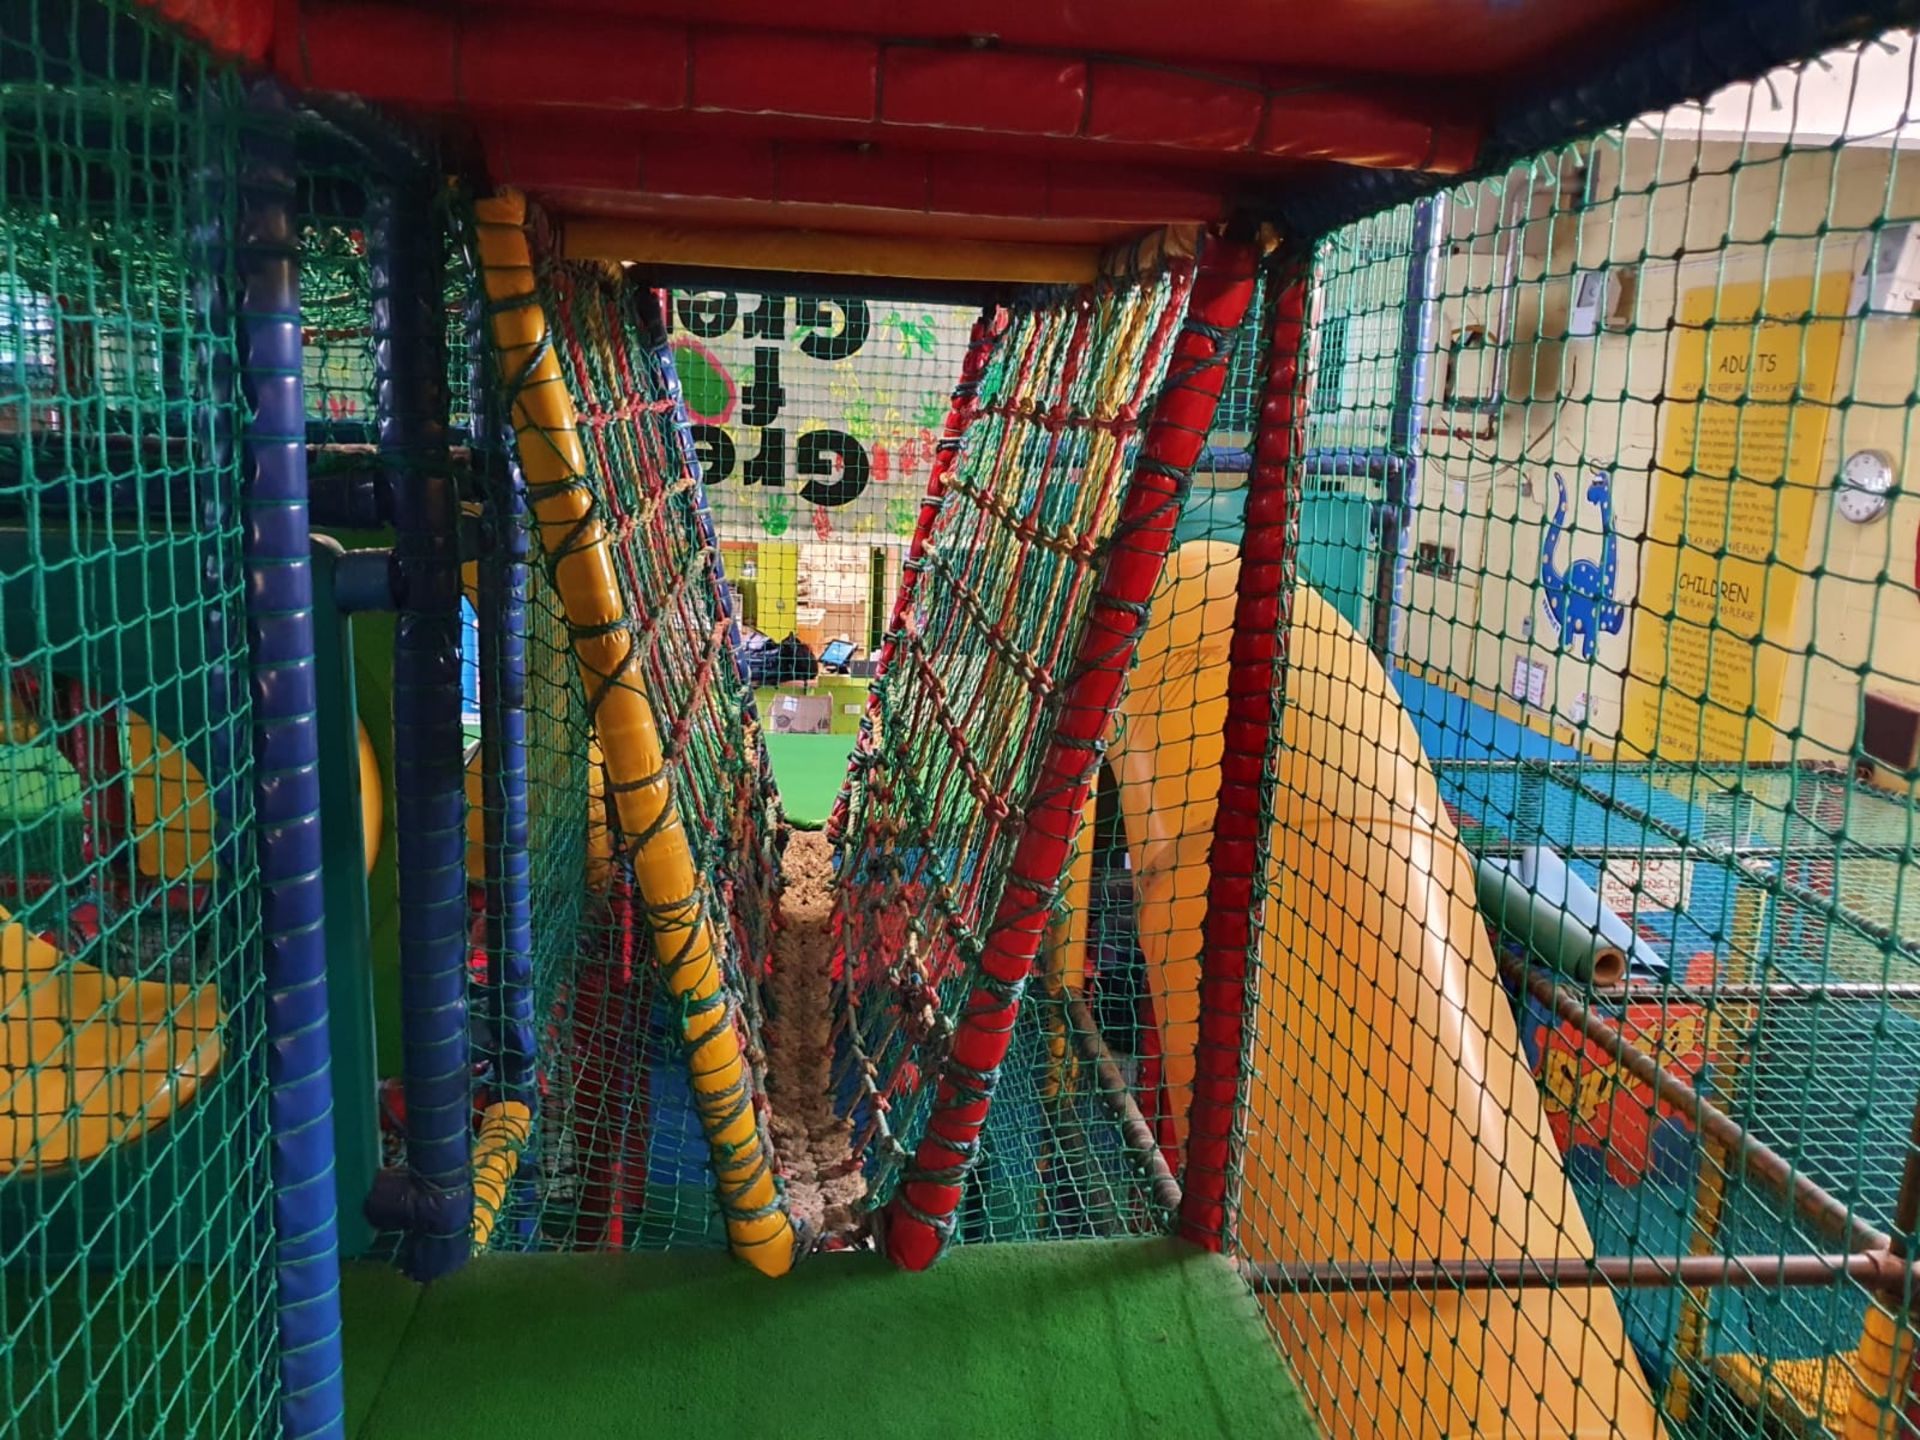 Bramleys Big Adventure Playground - Giant Action-Packed Playcentre With Slides, Zip Line Swings, - Image 93 of 128